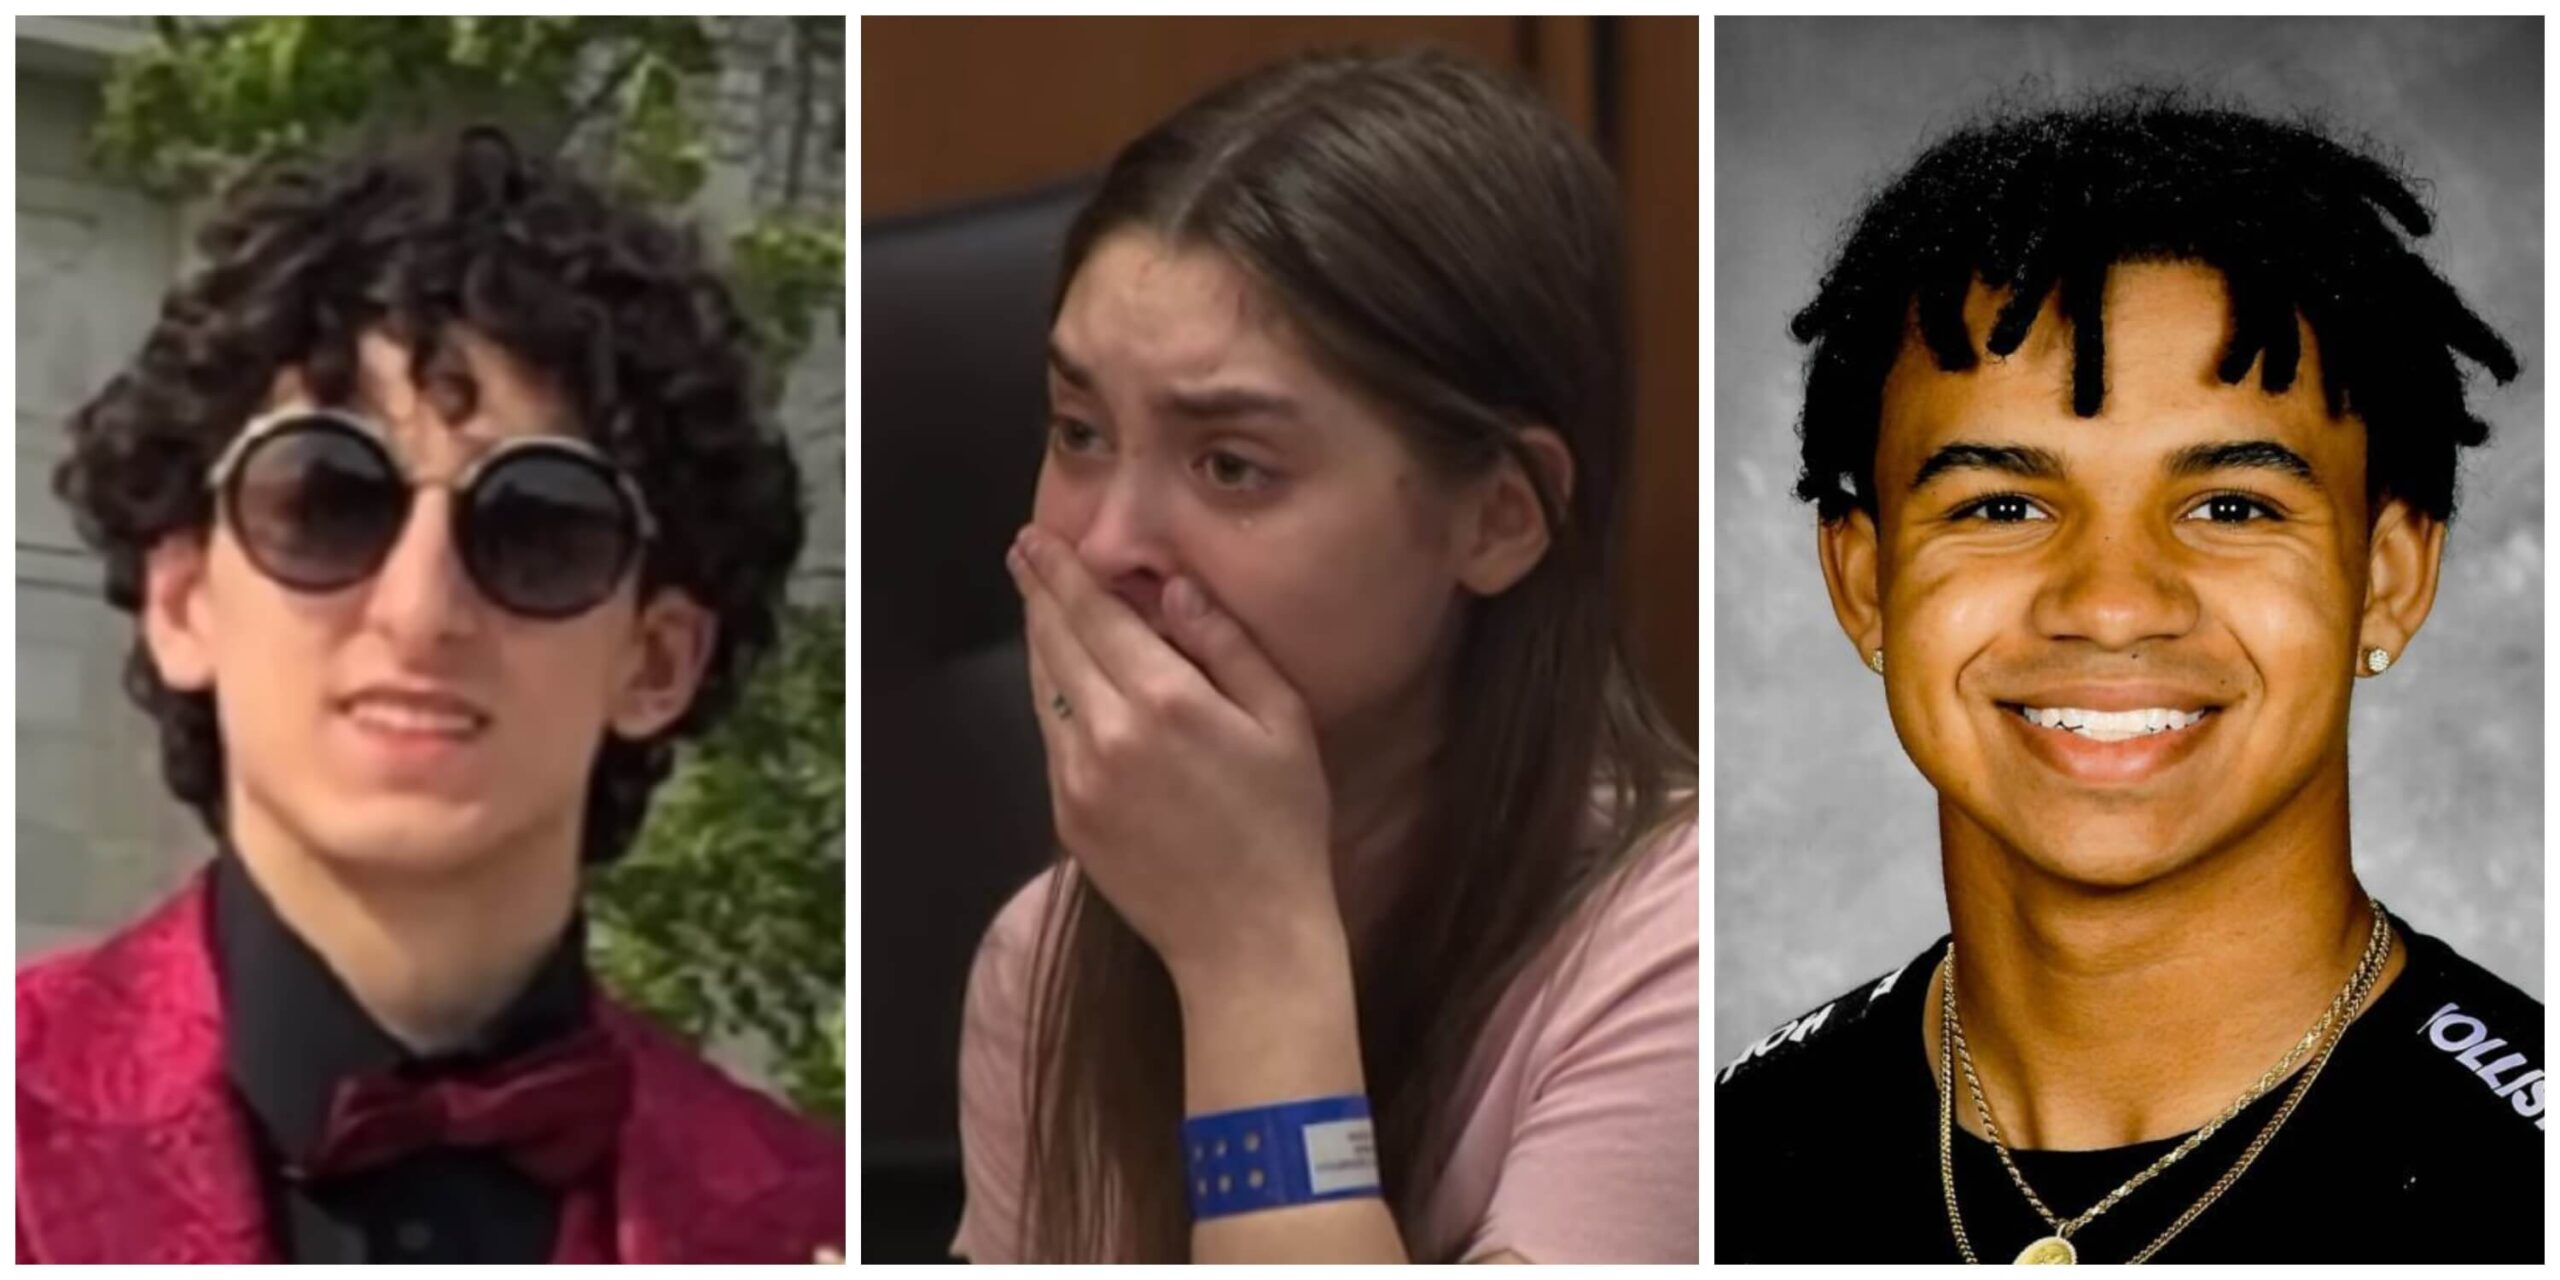 Innocent Passenger': 19-Year-Old White Girl Faces Life In Prison for Intentionally Crashing Car After Driving 100 MPH and Murdering Two, Including Black Teen Just 'Looking for a Ride'